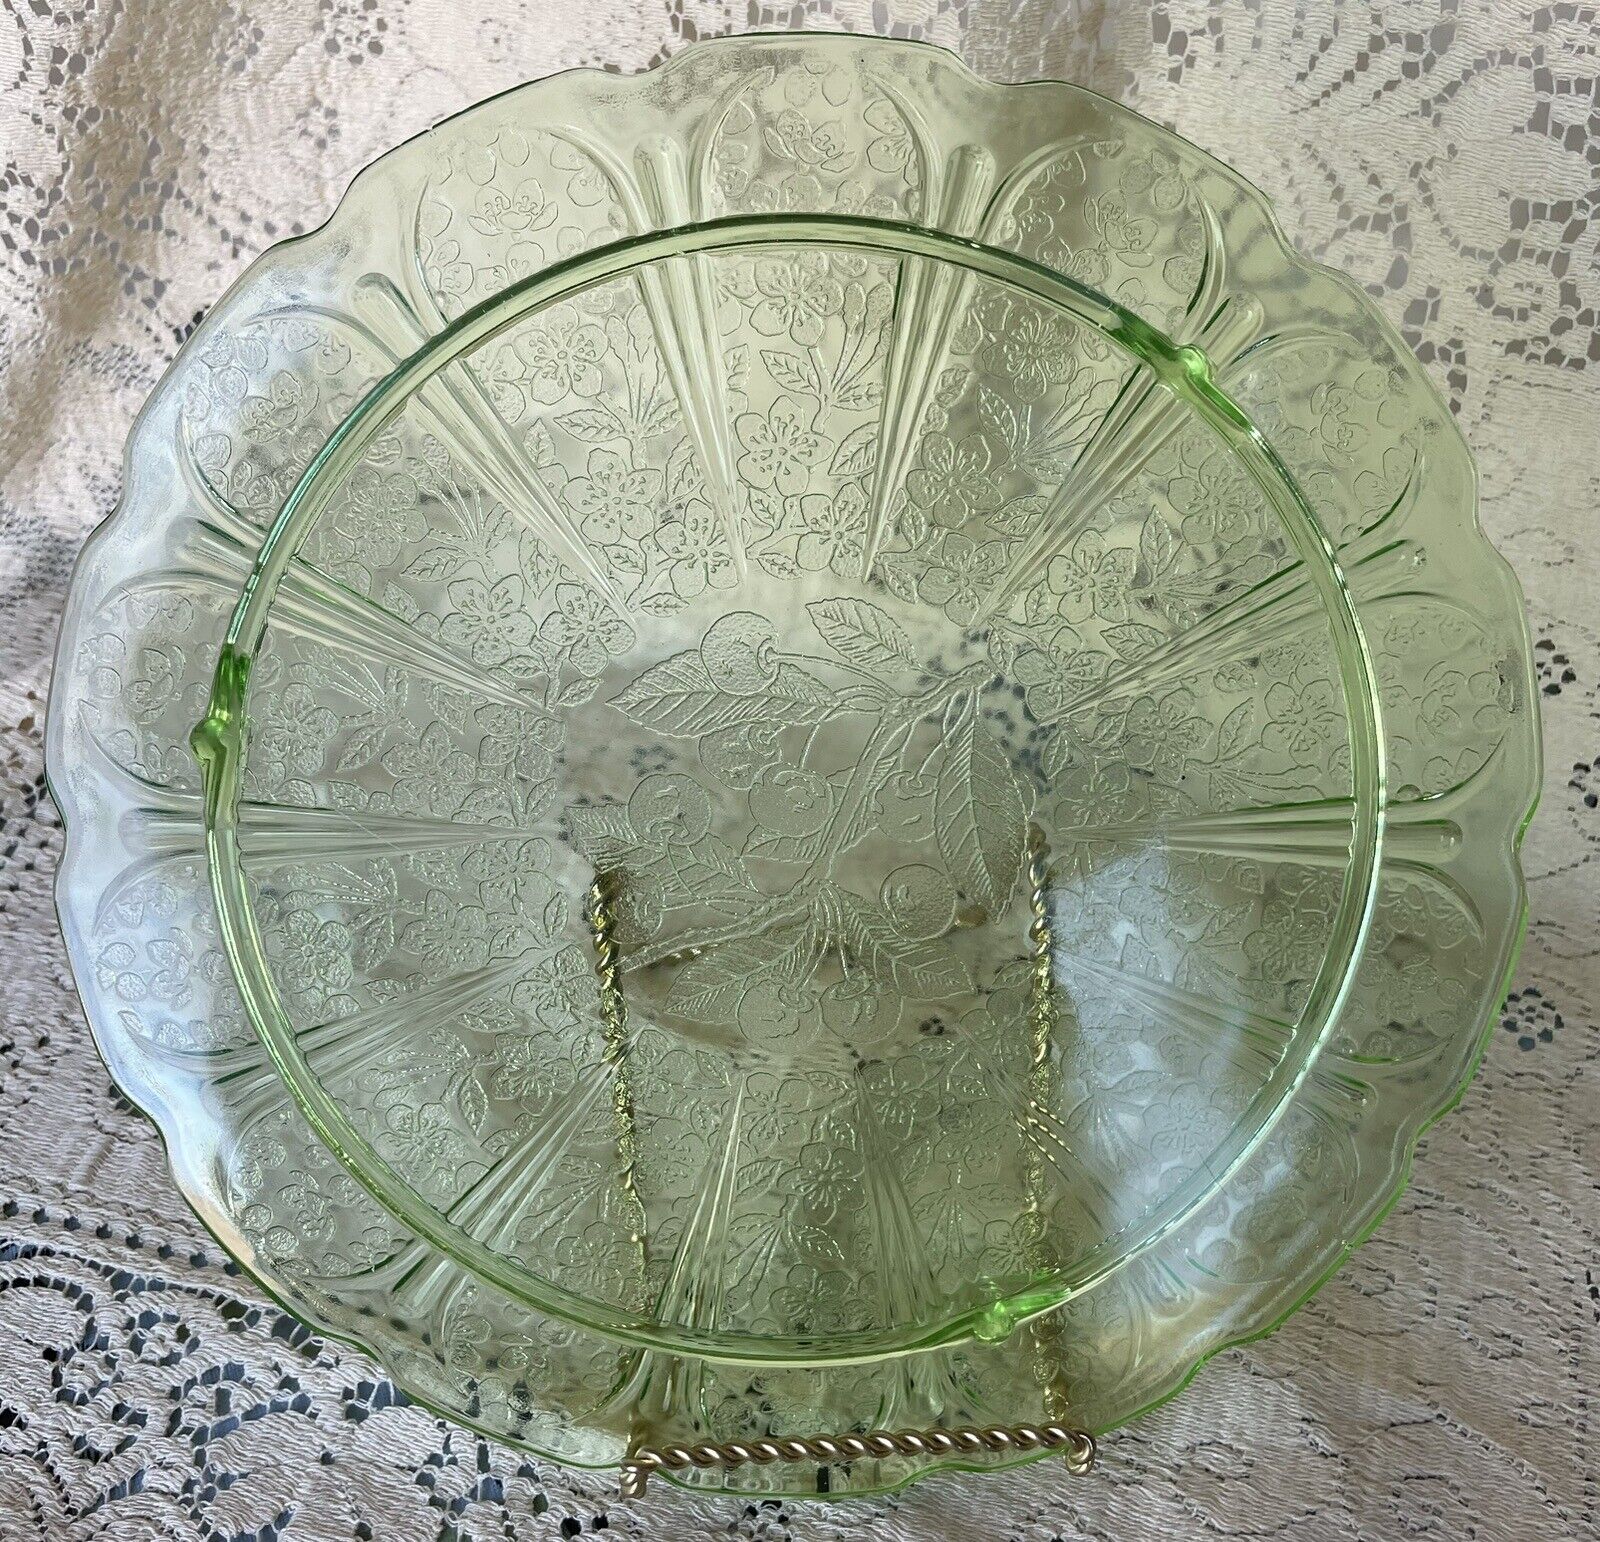 Cherry Blossom Green 3 Footed Cake Plate by Jeannette Glass 1930-1939